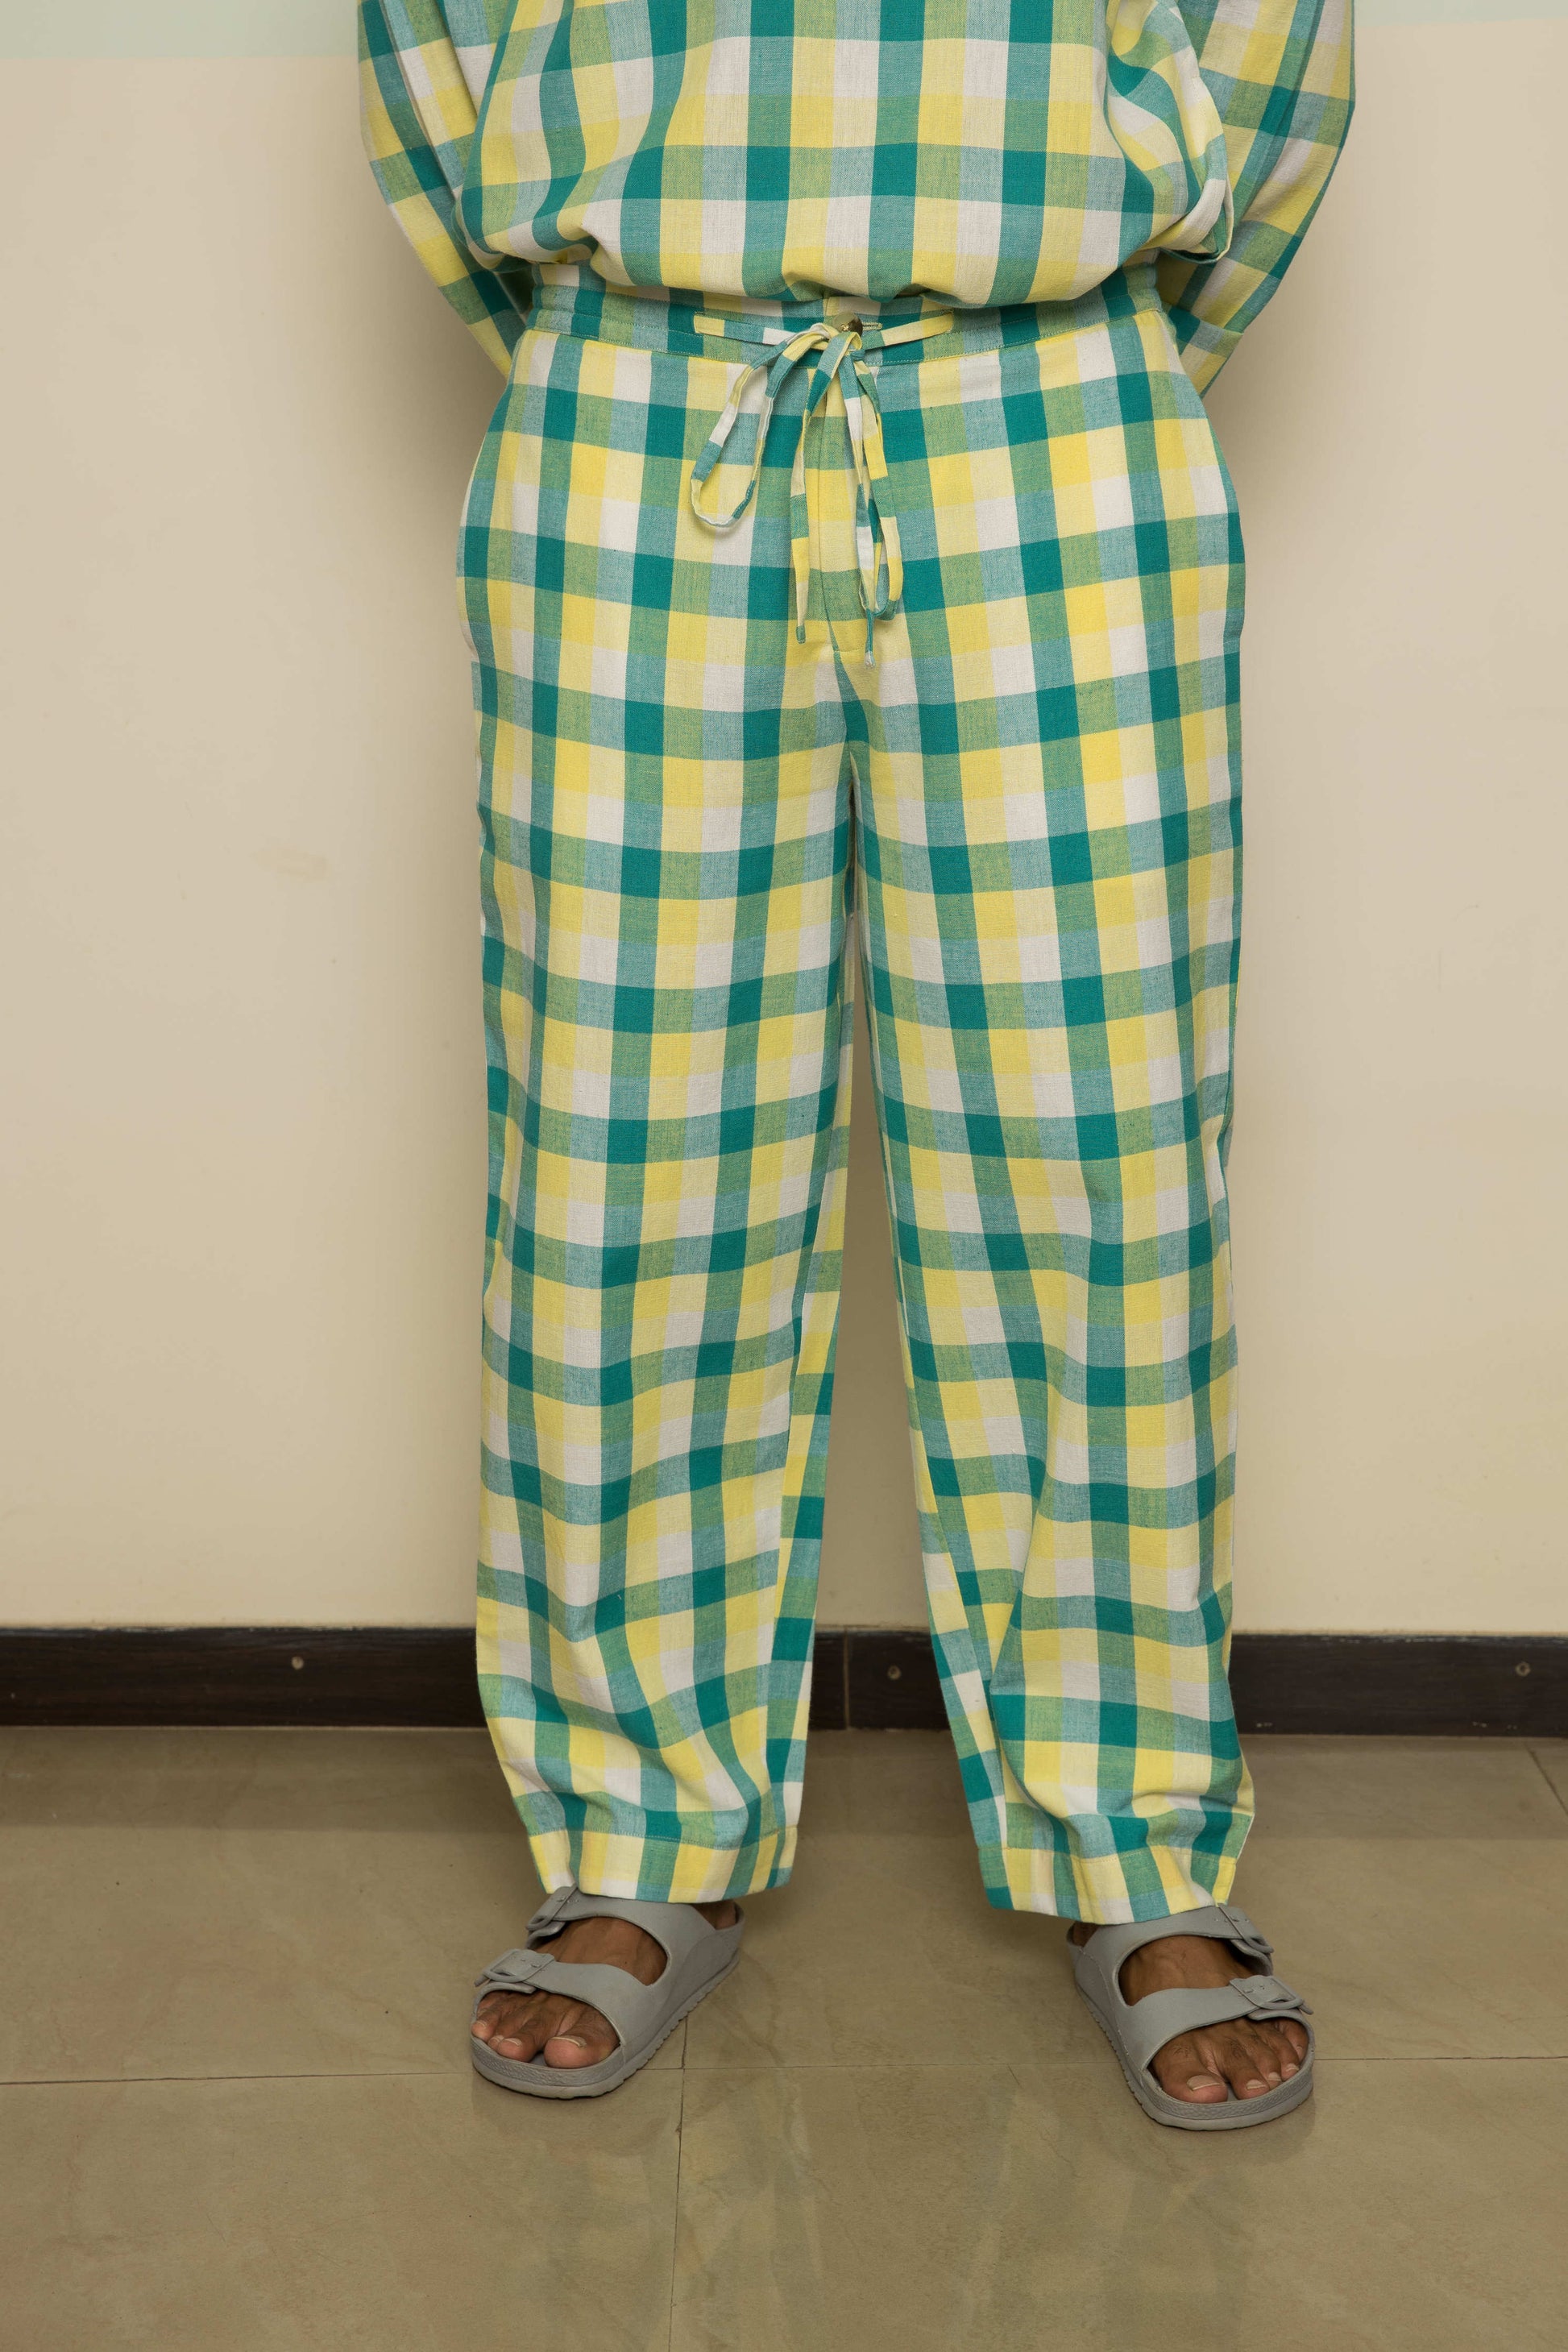 Green Casual Co-ord at Kamakhyaa by Anushé Pirani. This item is 100% Cotton, Casual Wear, Checks, Green, Handwoven, Handwoven Cotton, Lounge Wear Co-ords, Regular Fit, The Co-ord Edit, Womenswear